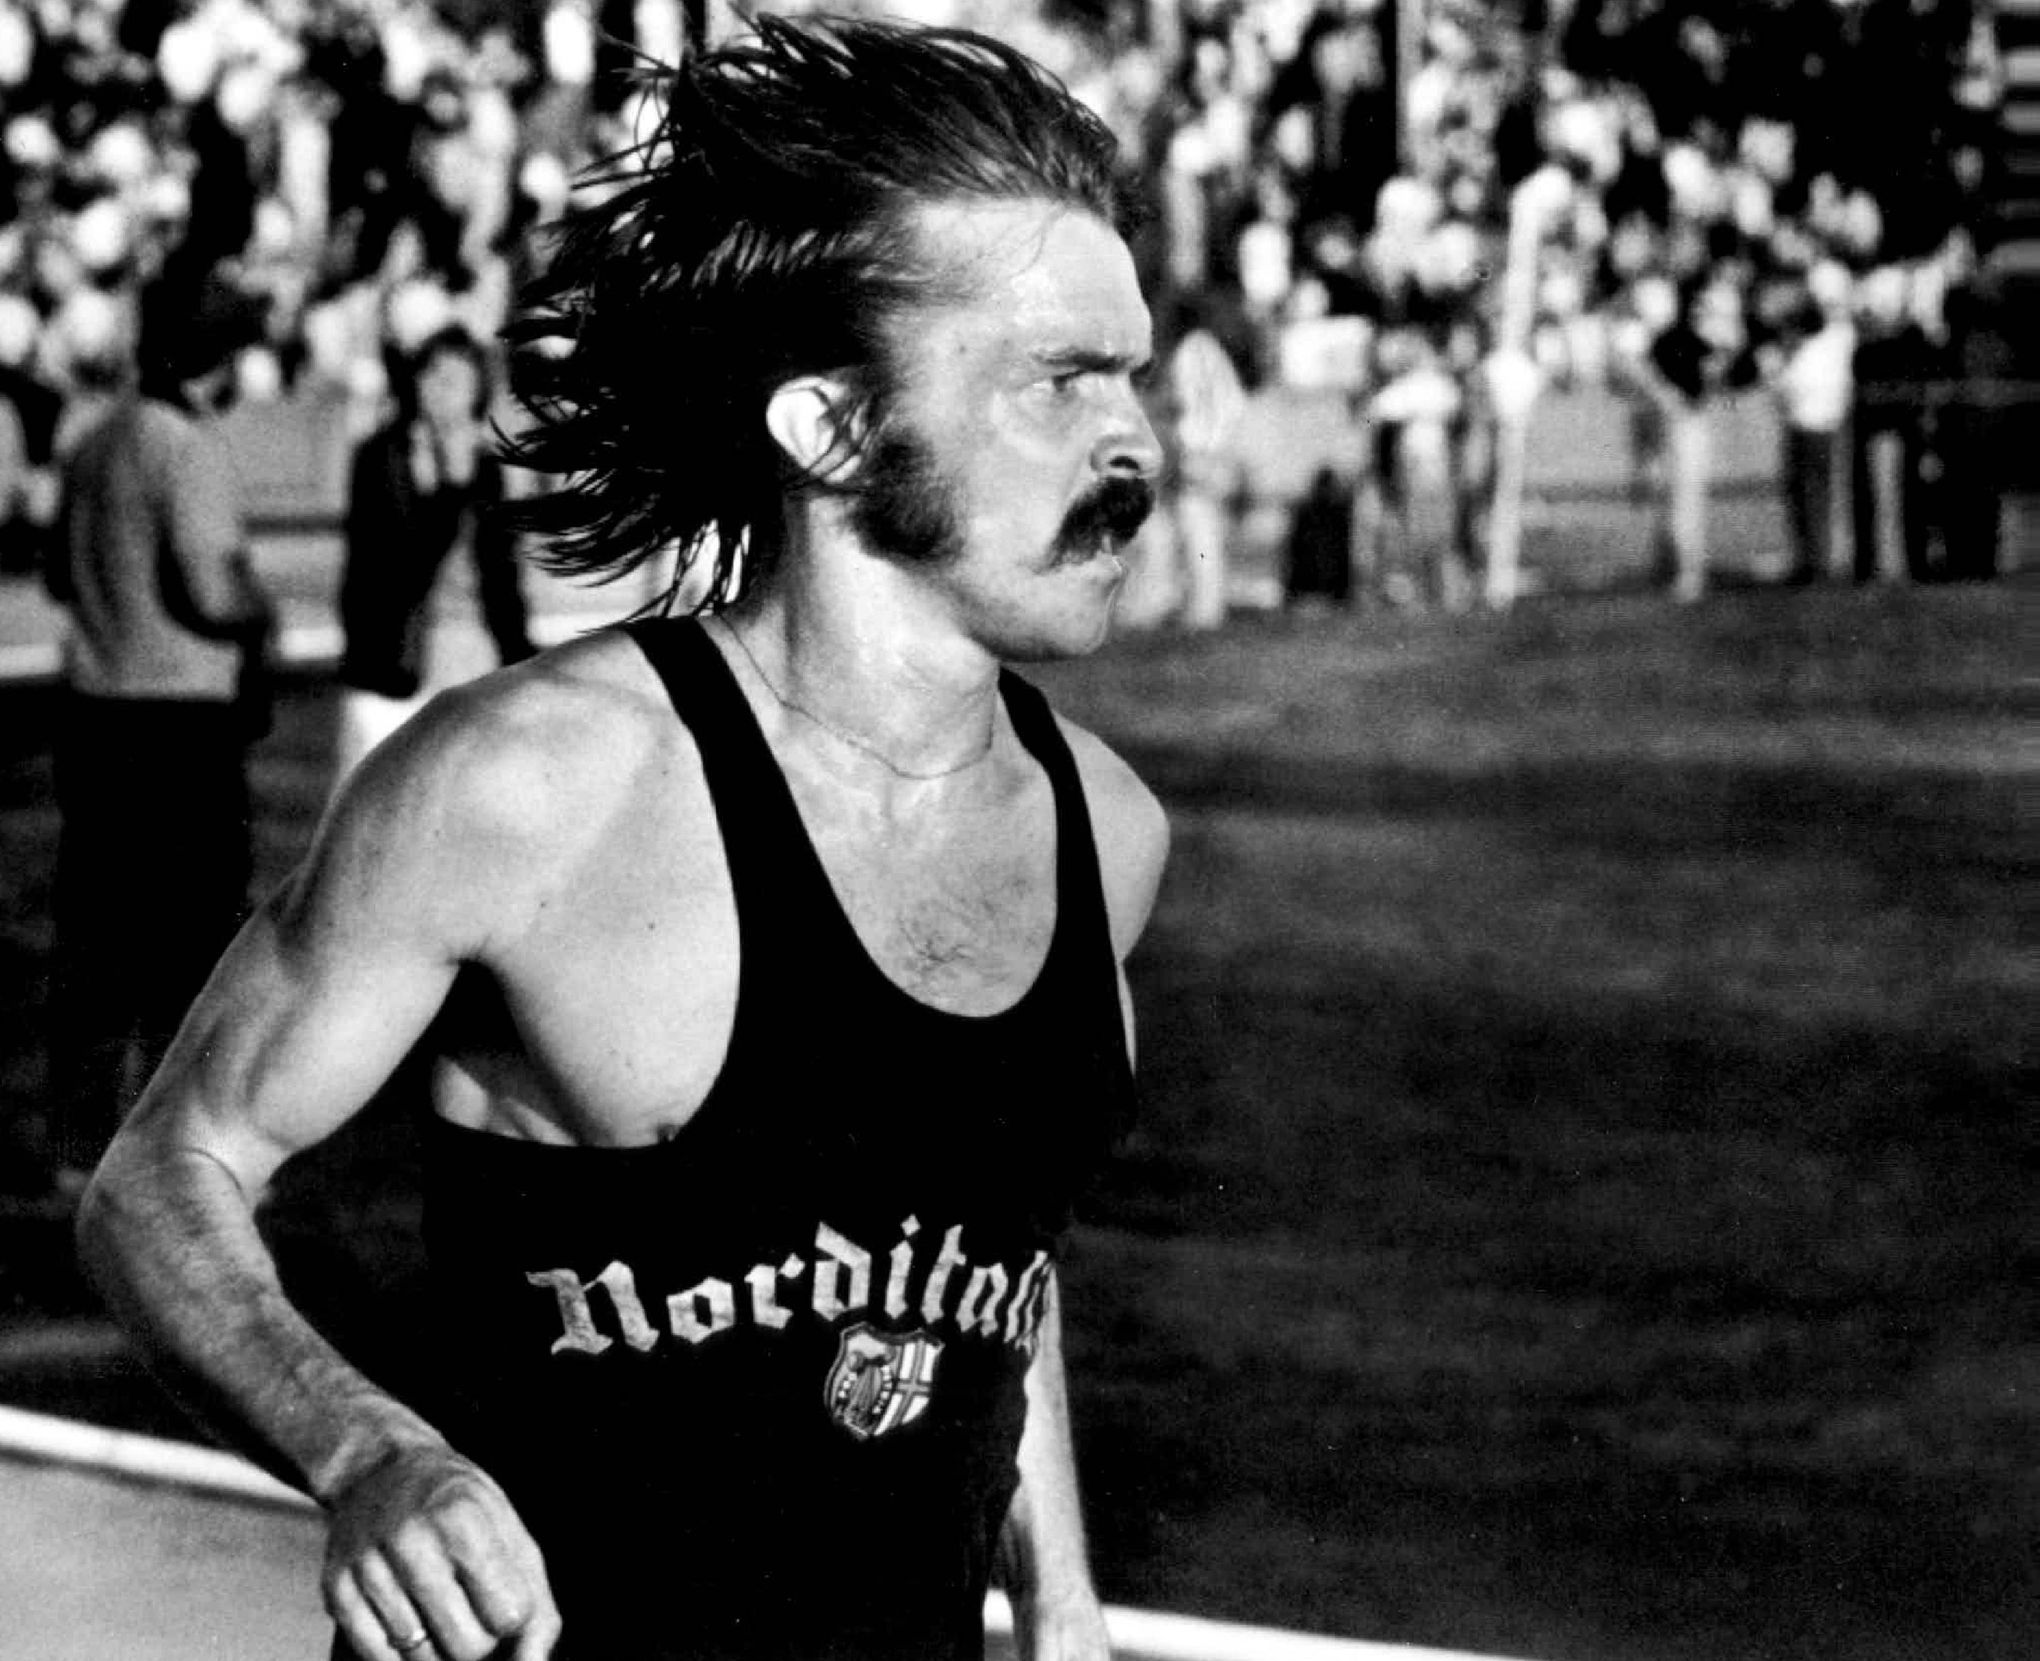 Steve Prefontaine still resonates 40 years after his death